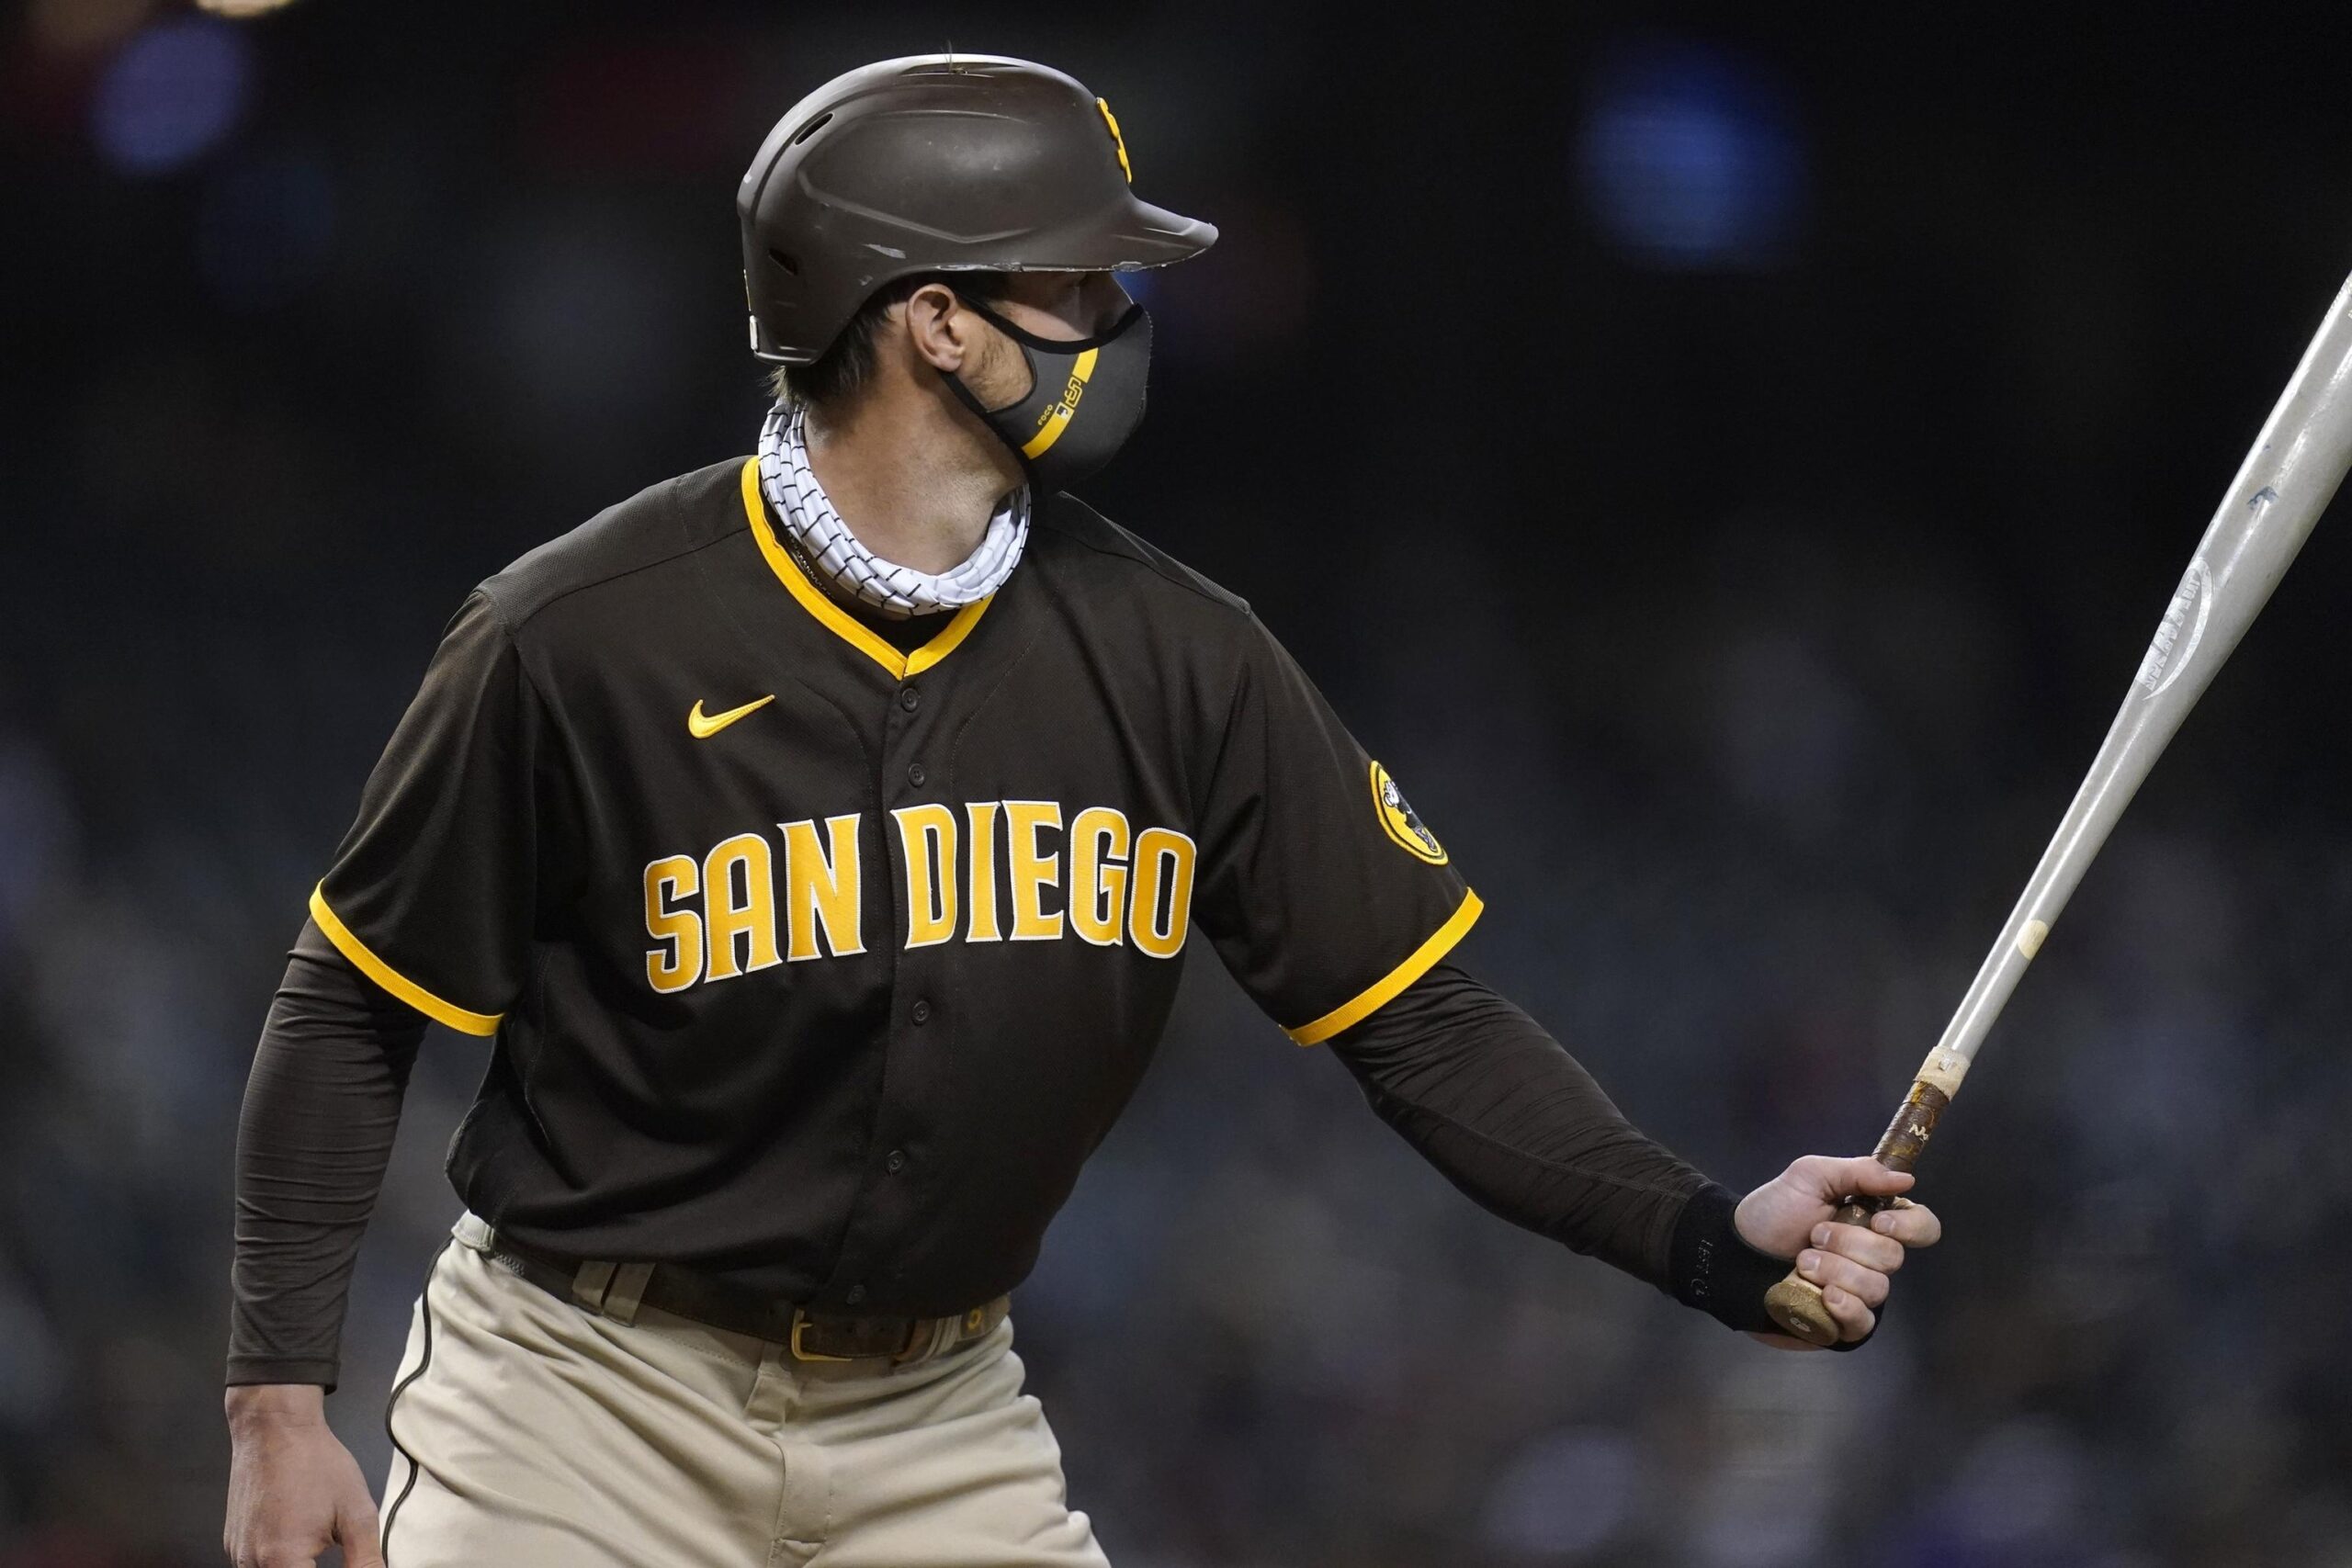 Padres players Fernando Tatis Jr., Wil Myers test positive for